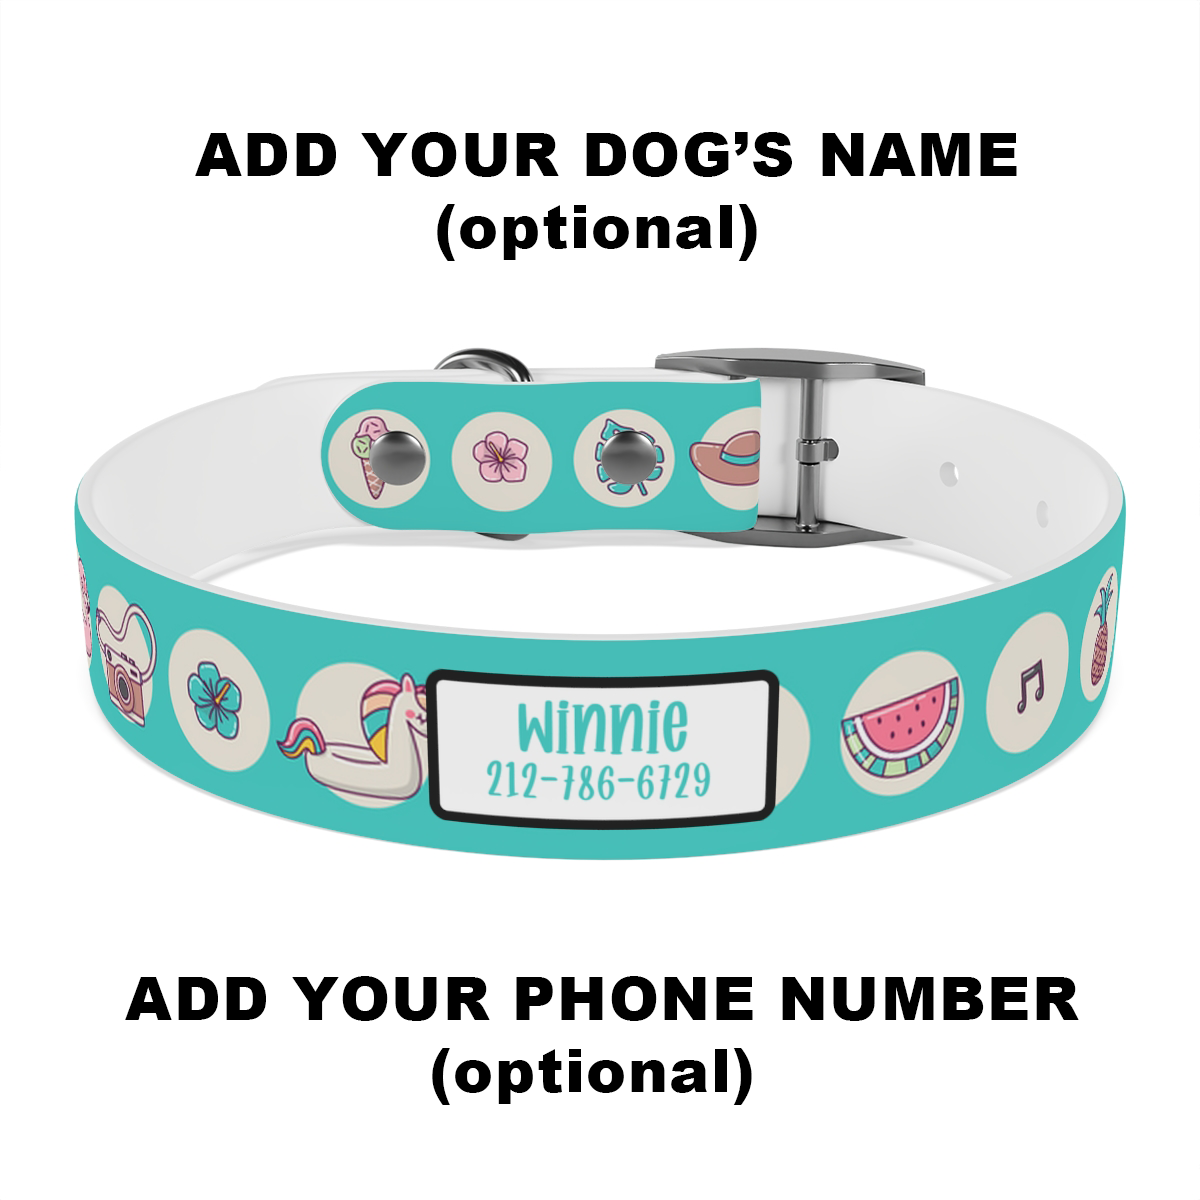 Summer Icons Personalized Dog Collar